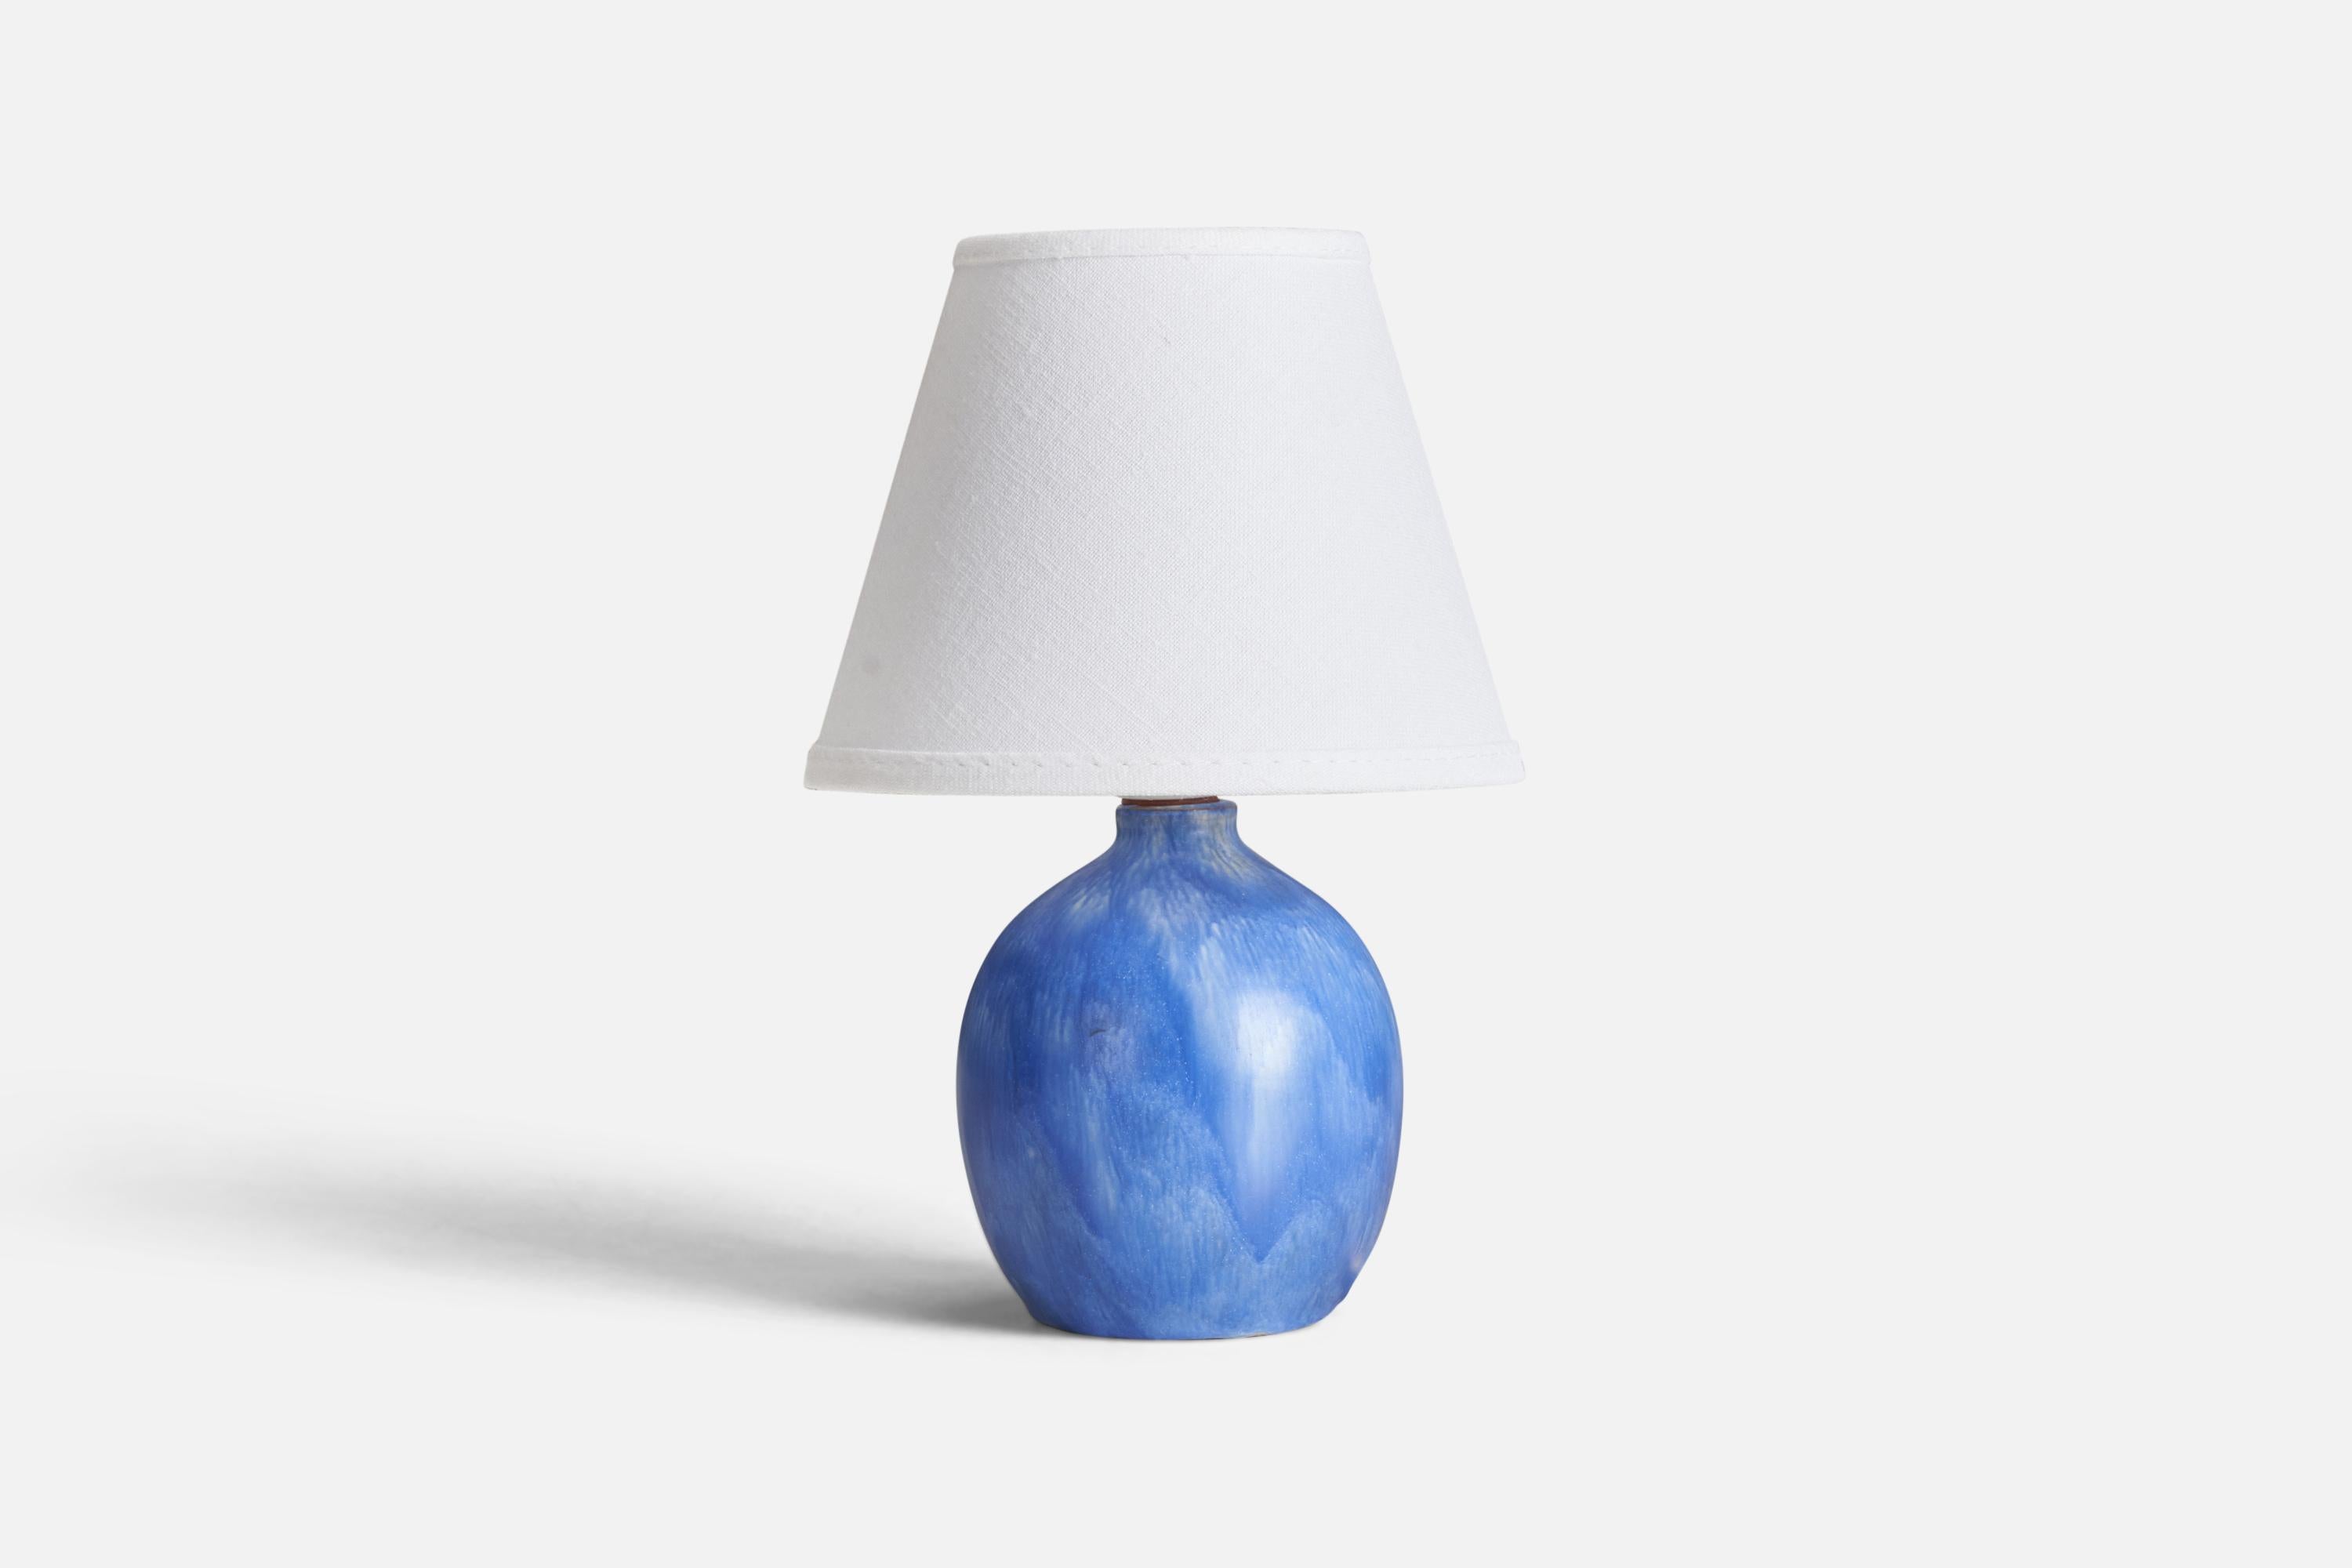 A stoneware table lamp designed by Martin Flodén and produced in Arvika, Sweden, 1970s.

Dimensions of Lamp (inches) : 6.3 x 3.6 x 3.6 (height x width x depth)
Dimensions of lampshade (inches) : 3 x 5.75 x 4.5 (top diameter x bottom diameter x